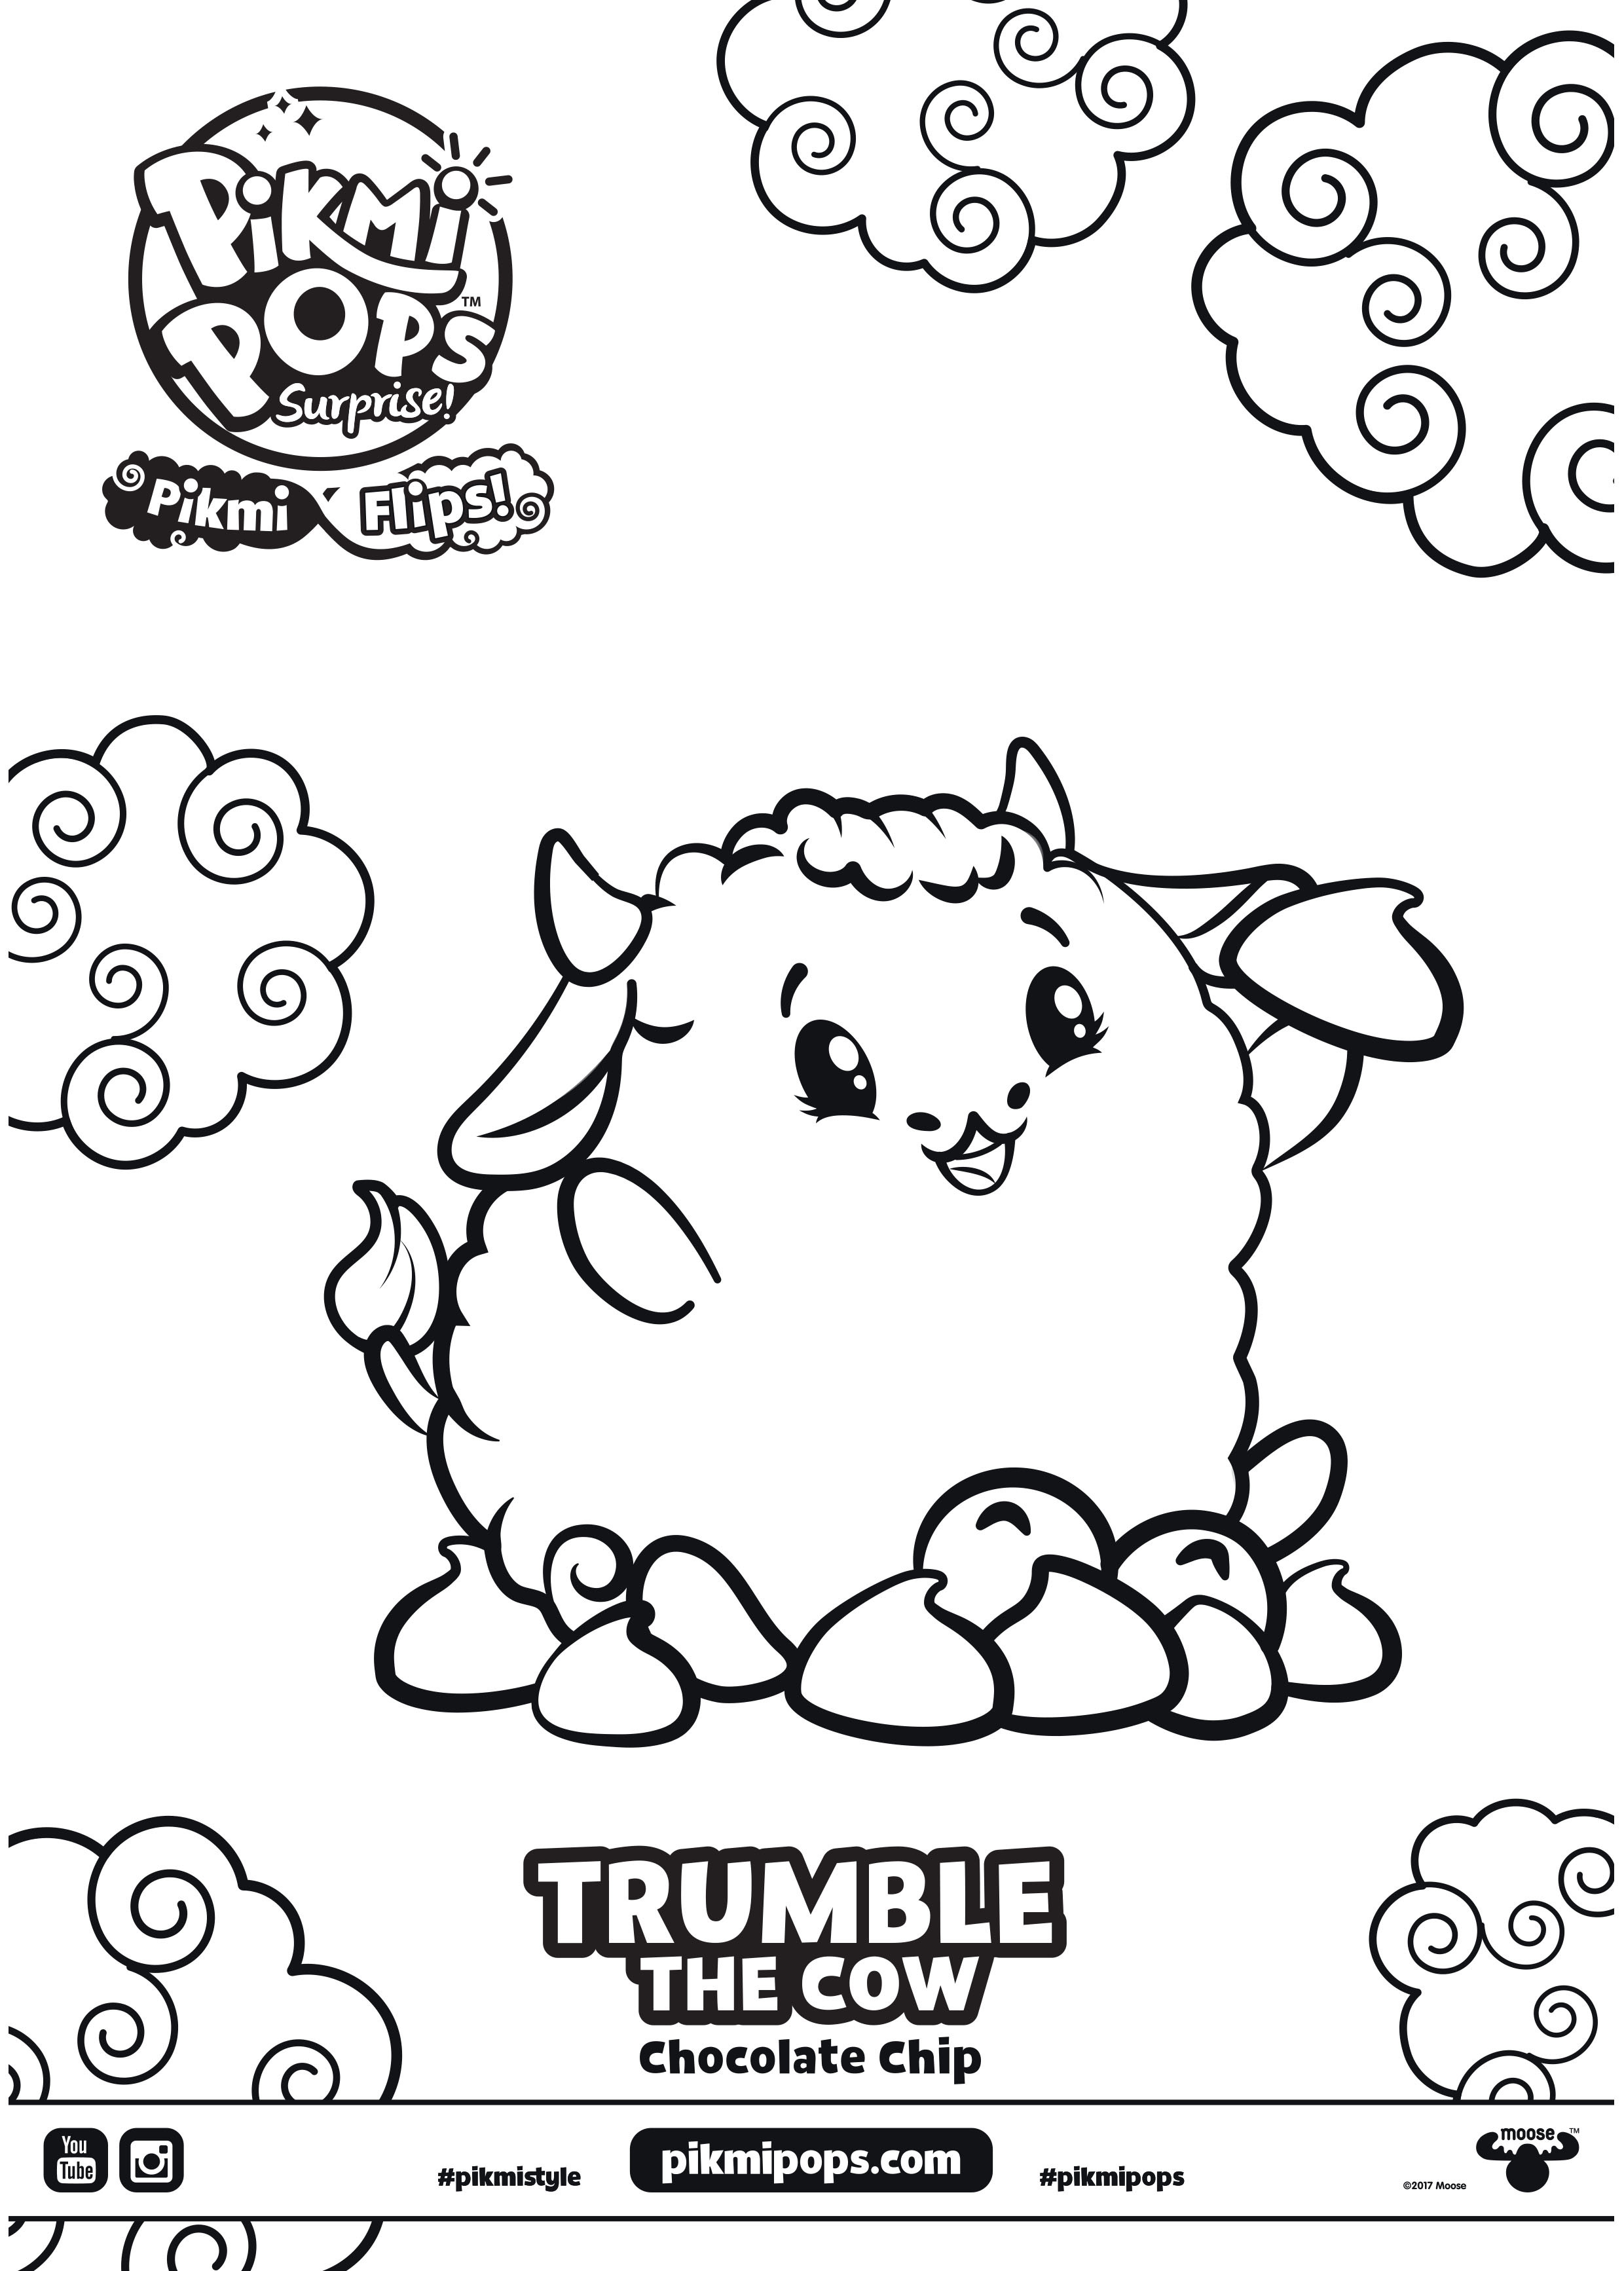 20 Ideas for Pikmi Pops Coloring Pages - Home Inspiration and Ideas ...